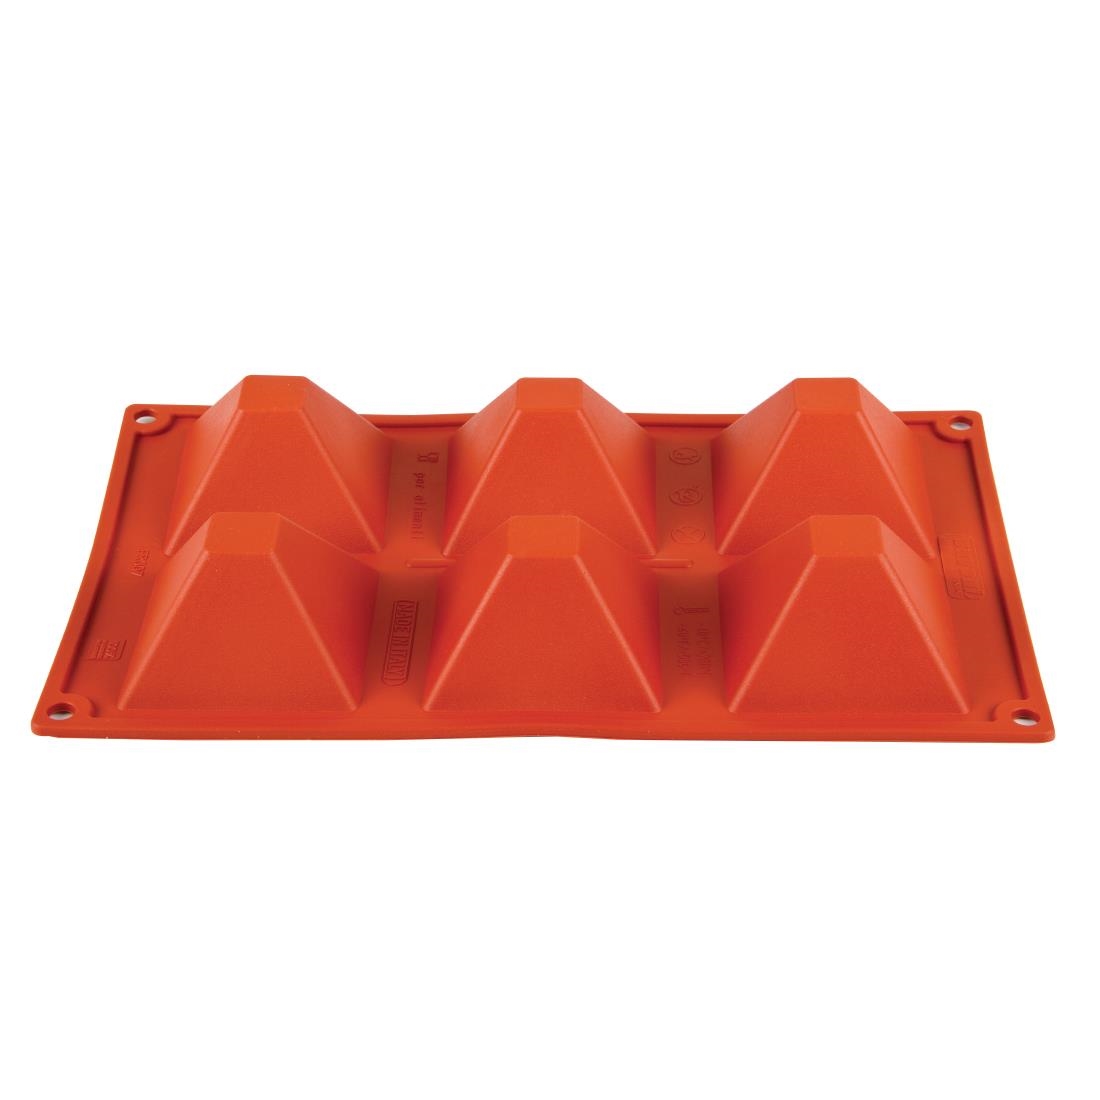 Pavoni Formaflex Silicone Pyramid Mould 6 Cup